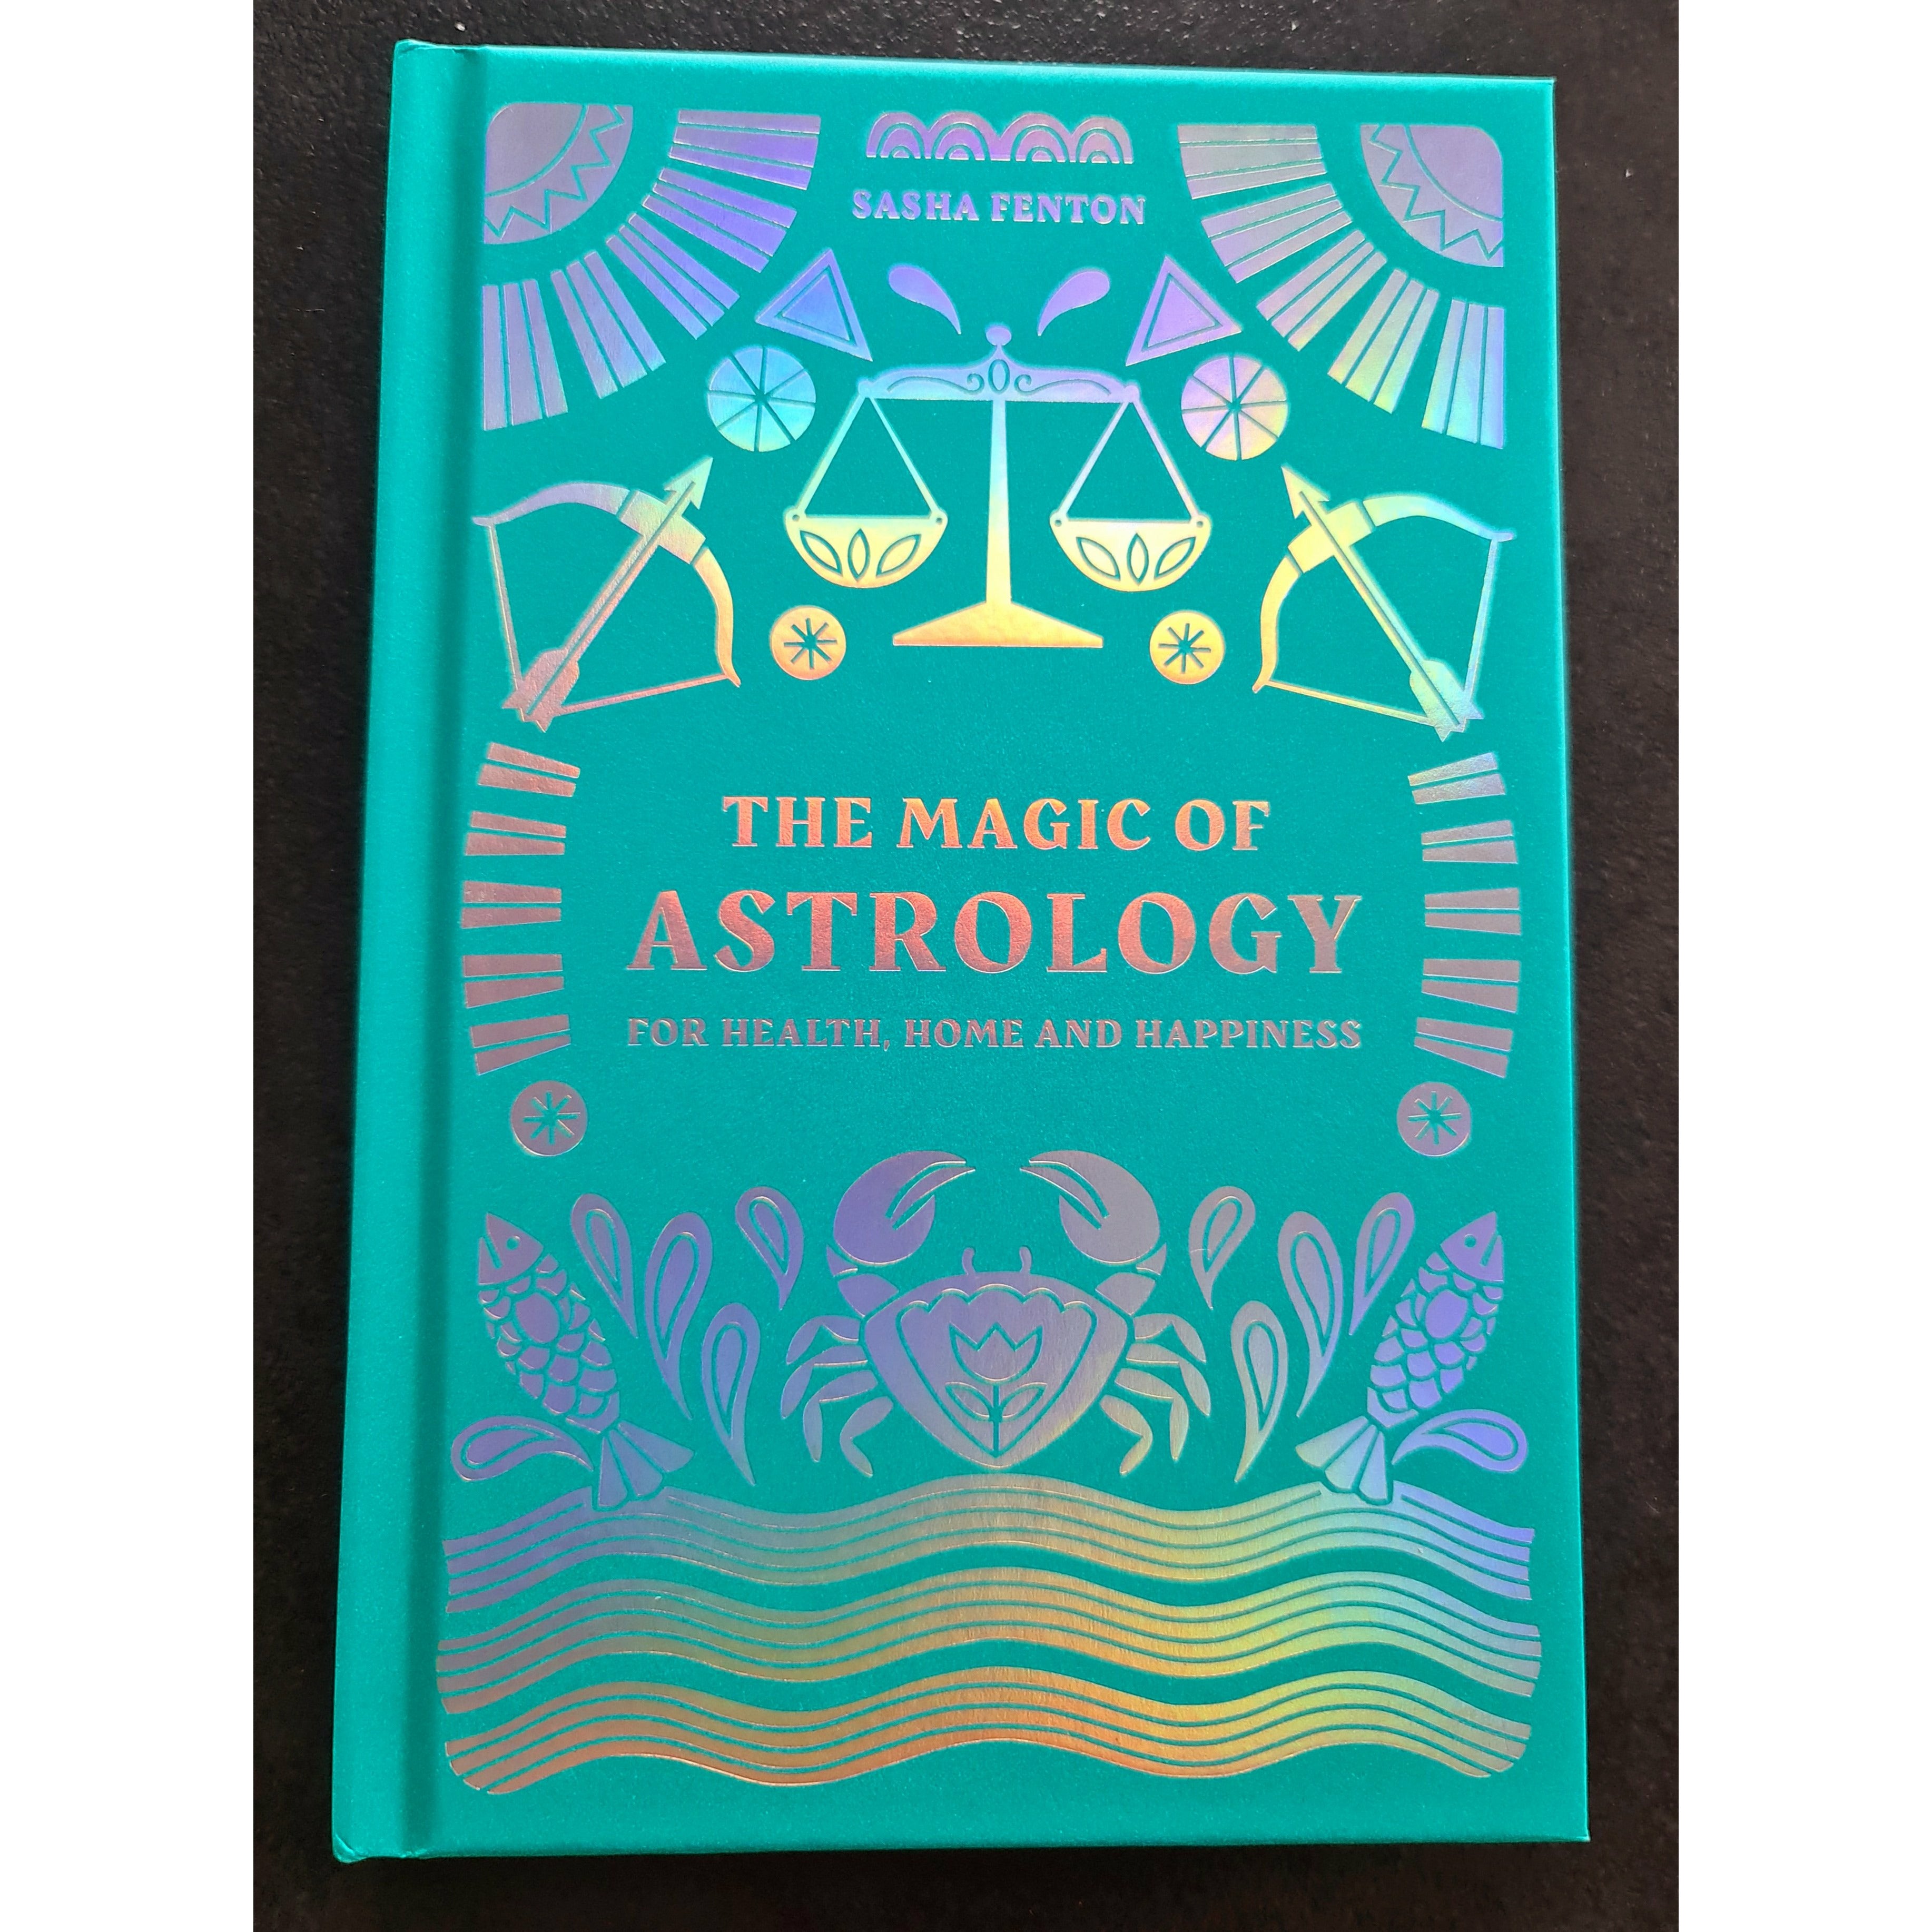 THE MAGIC OF ASTROLOGY